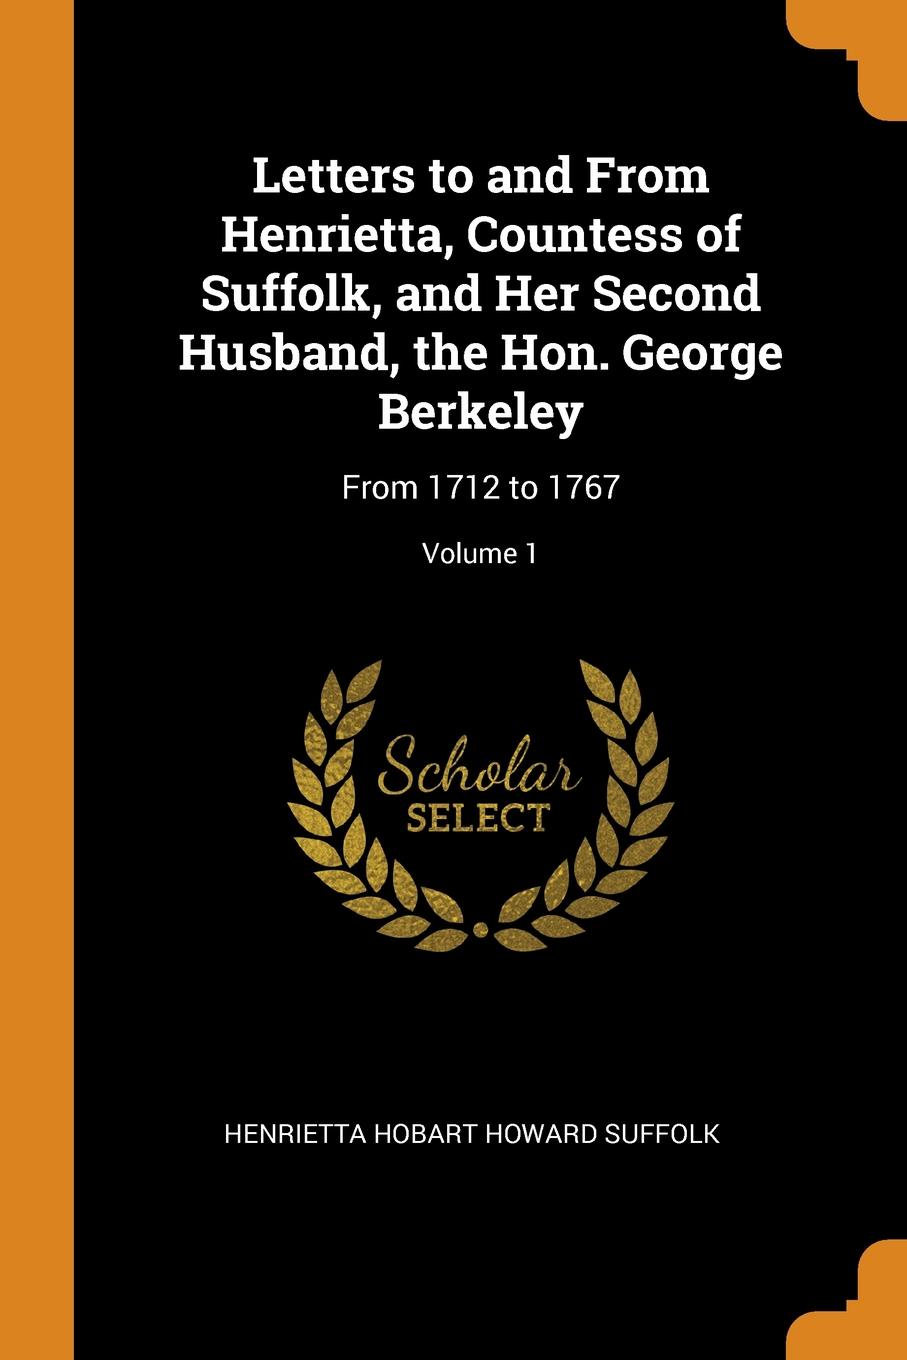 Letters to and From Henrietta, Countess of Suffolk, and Her Second Husband, the Hon. George Berkeley. From 1712 to 1767; Volume 1